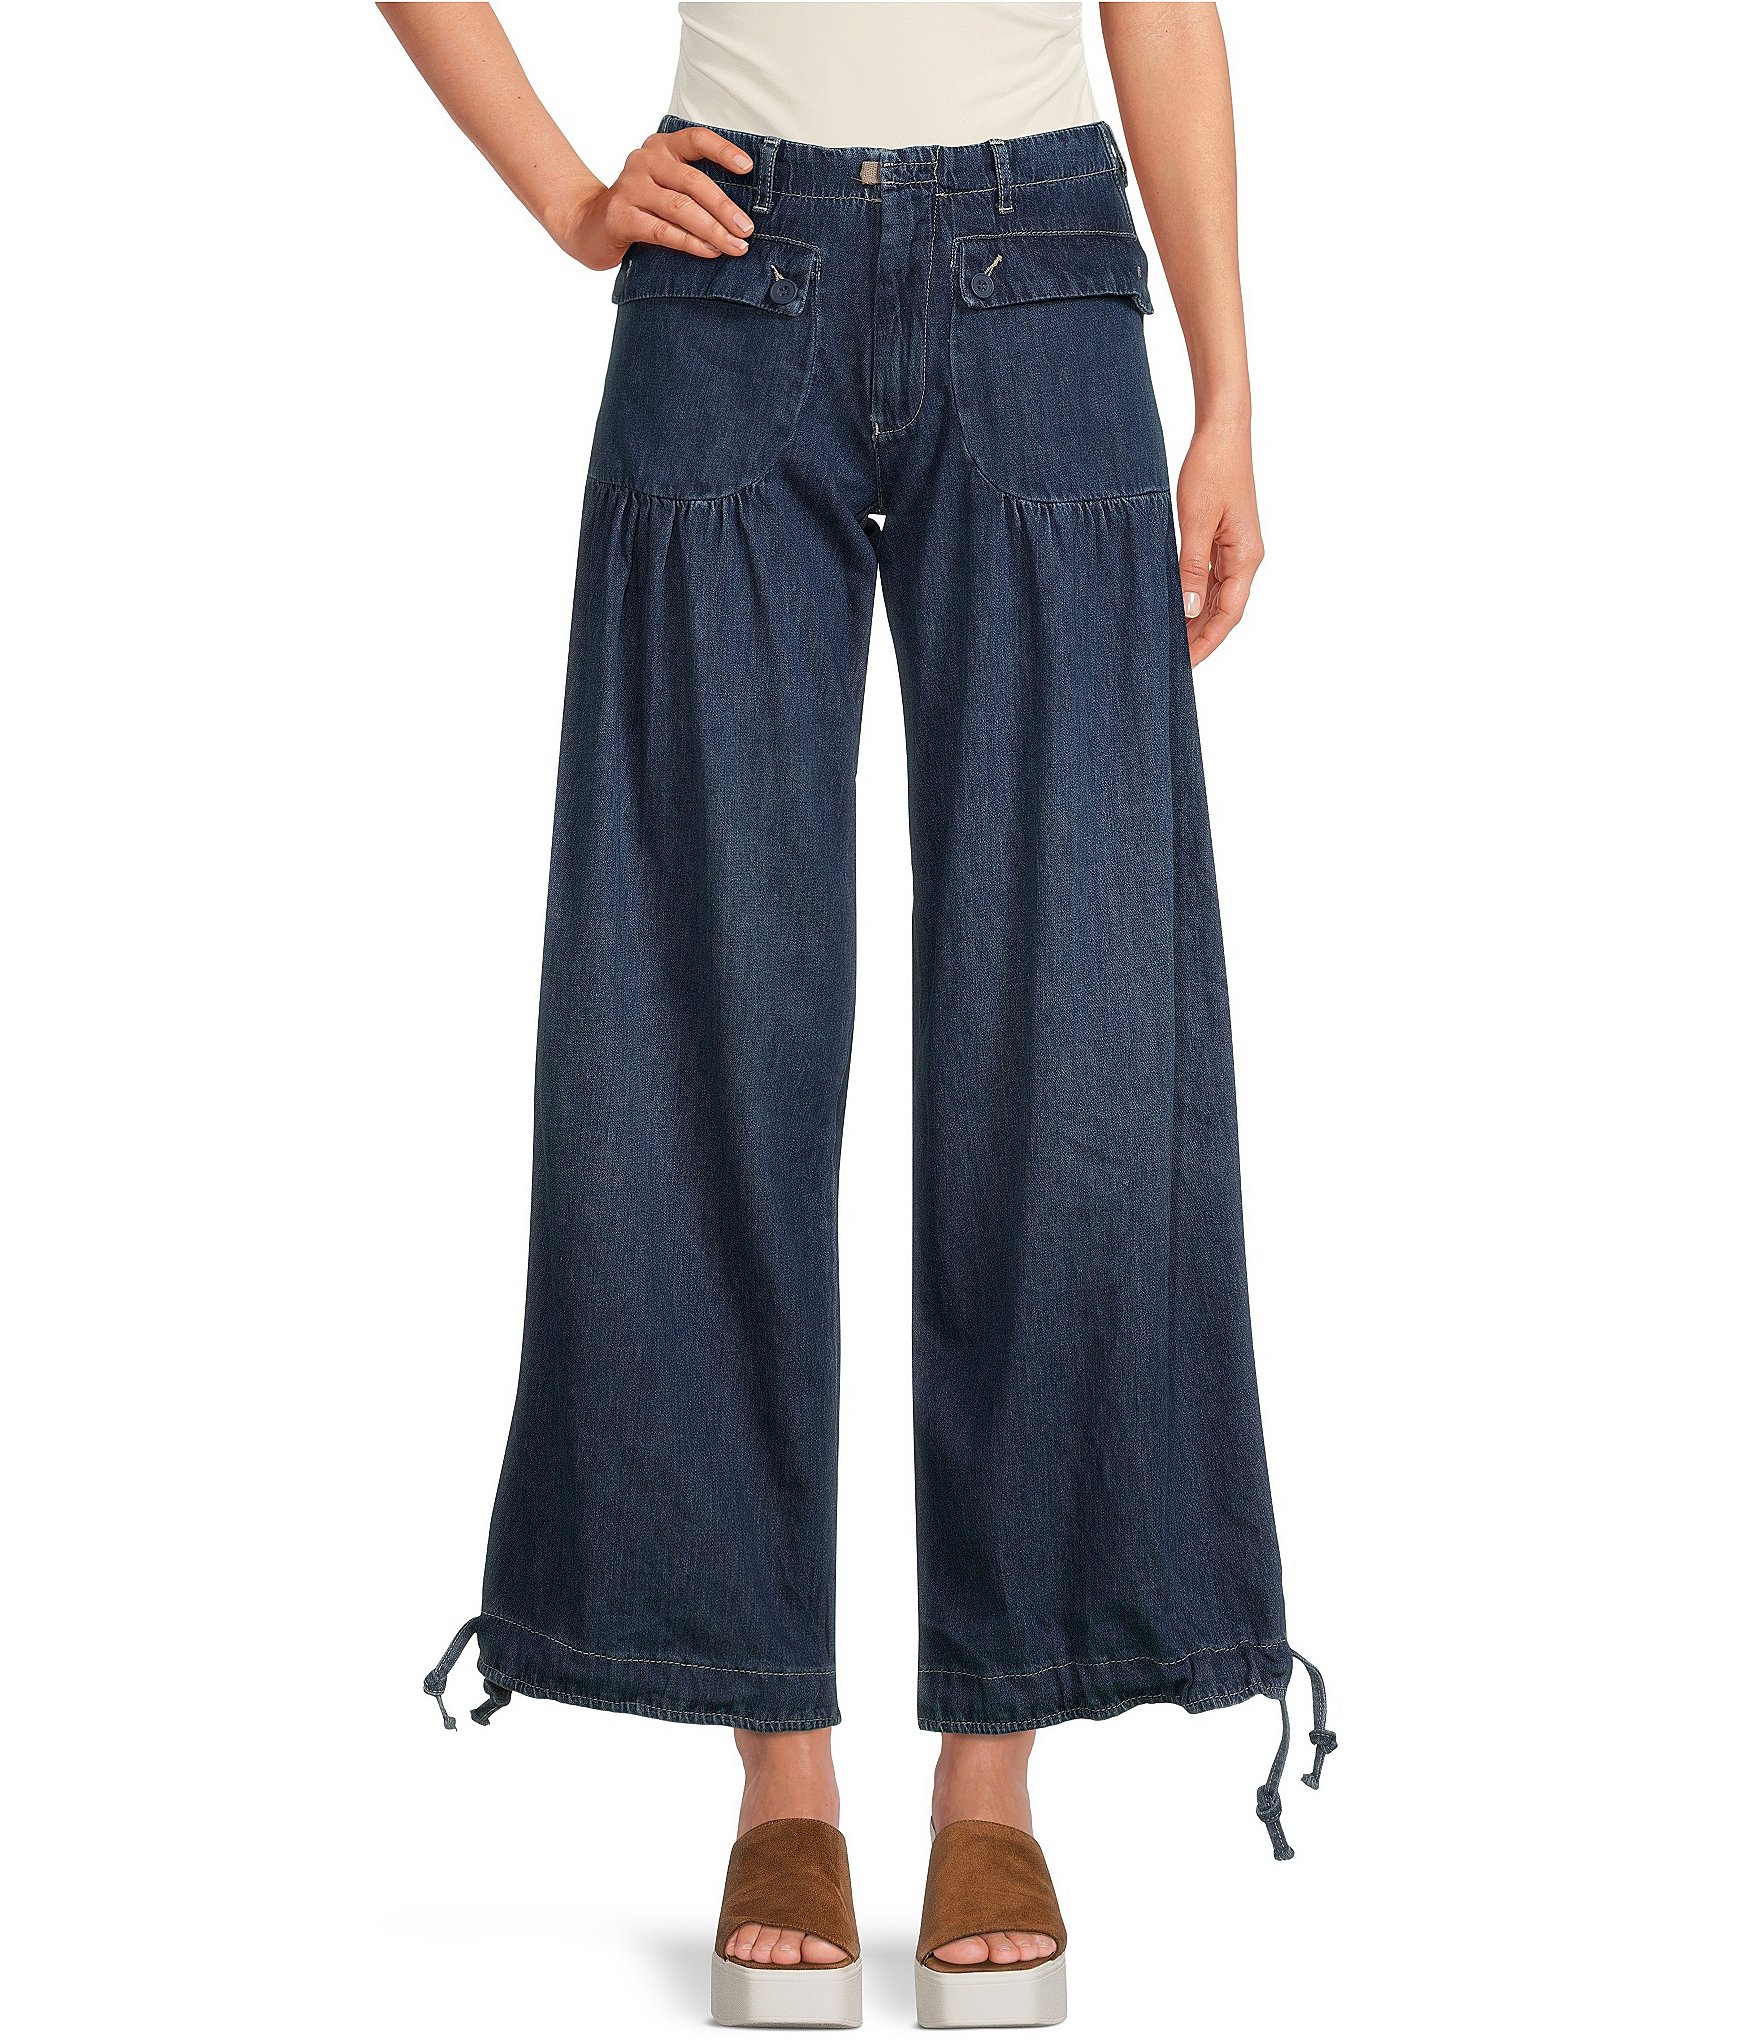 https://dimg.dillards.com/is/image/DillardsZoom/zoom/free-people-lotus-mid-rise-cinched-tie-wide-leg-banded-ankle-jeans/00000000_zi_89384e45-ebb0-4623-9abd-901d906ebd9e.jpg